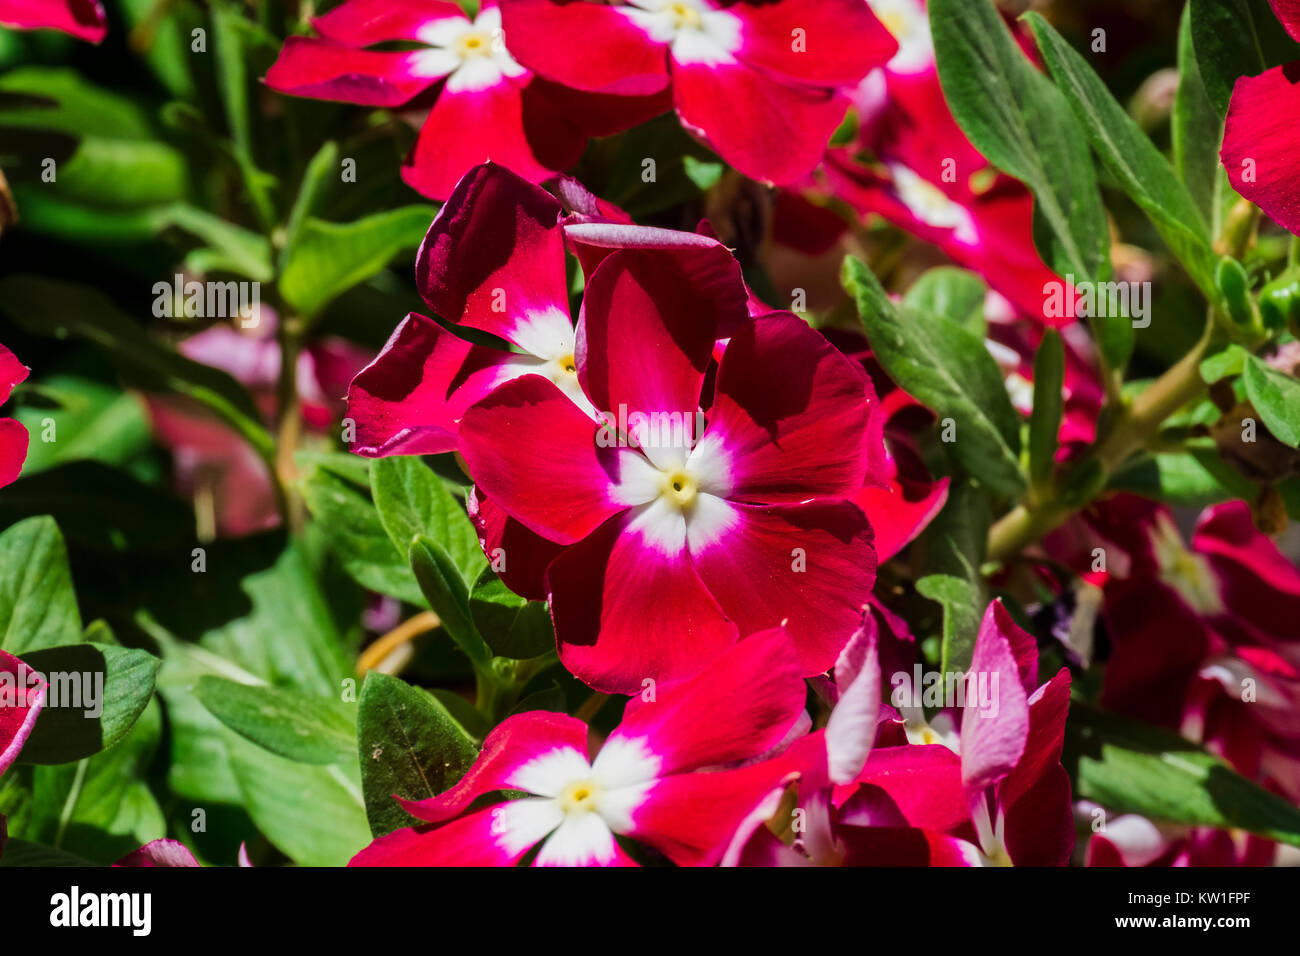 Scarlet vinca flowers with white centers (Catharanthus roseus) Stock Photo